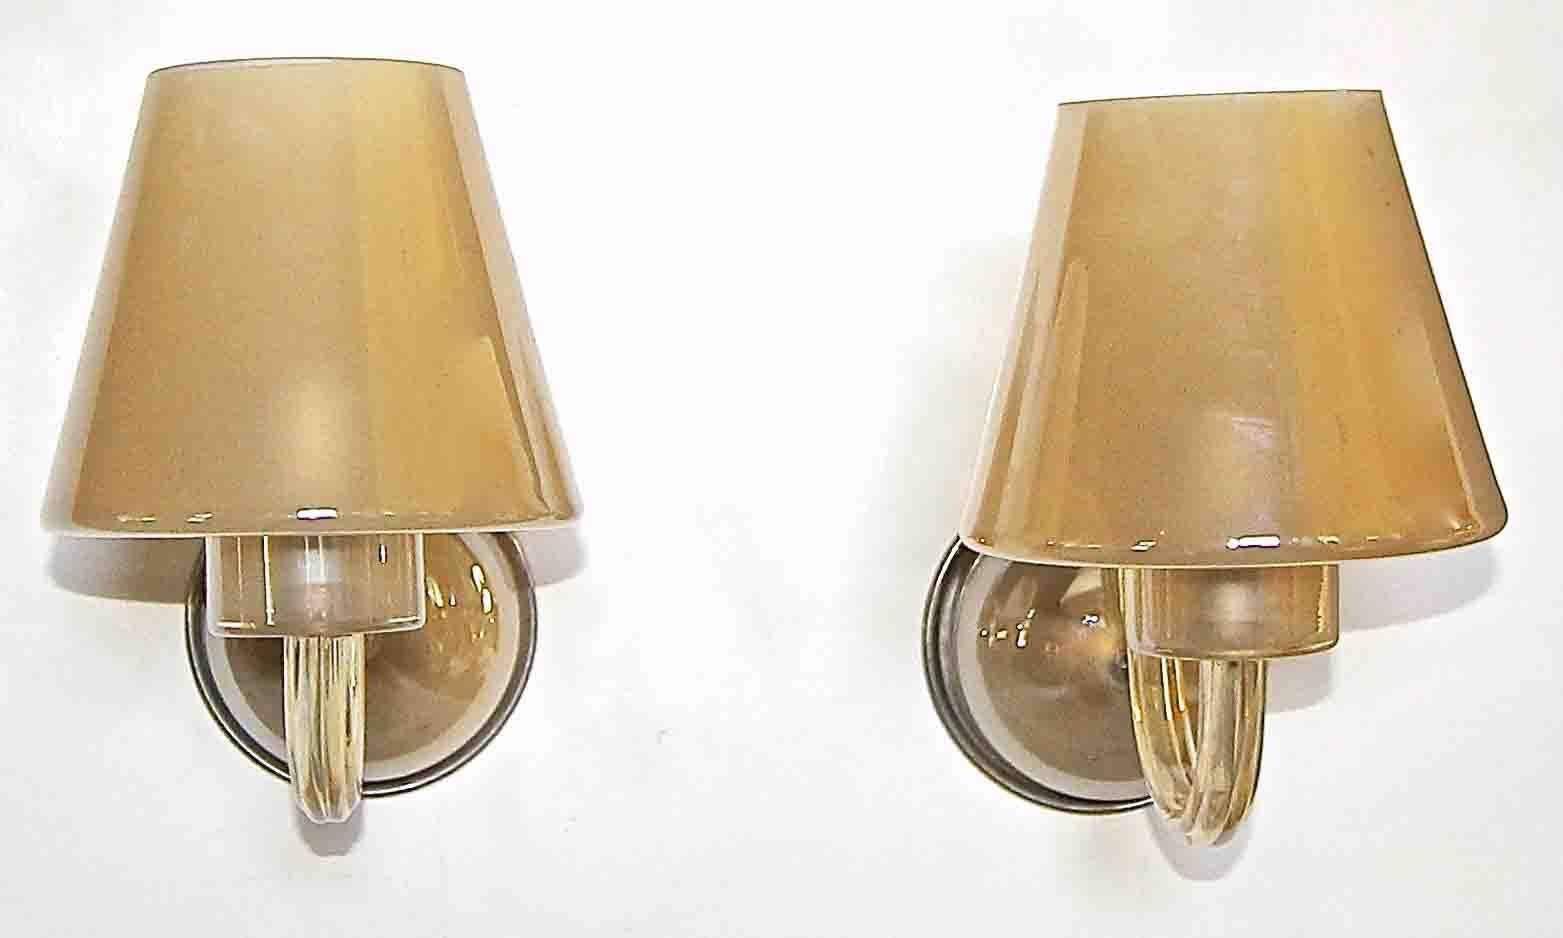 Pair of Murano glass single arm wall sconces in gold champagne color with glass shades. Exterior of glass has a slight opalescent appearance and interior is acid etched. Each sconce uses one regular size A base bulb. Newly wired for US.